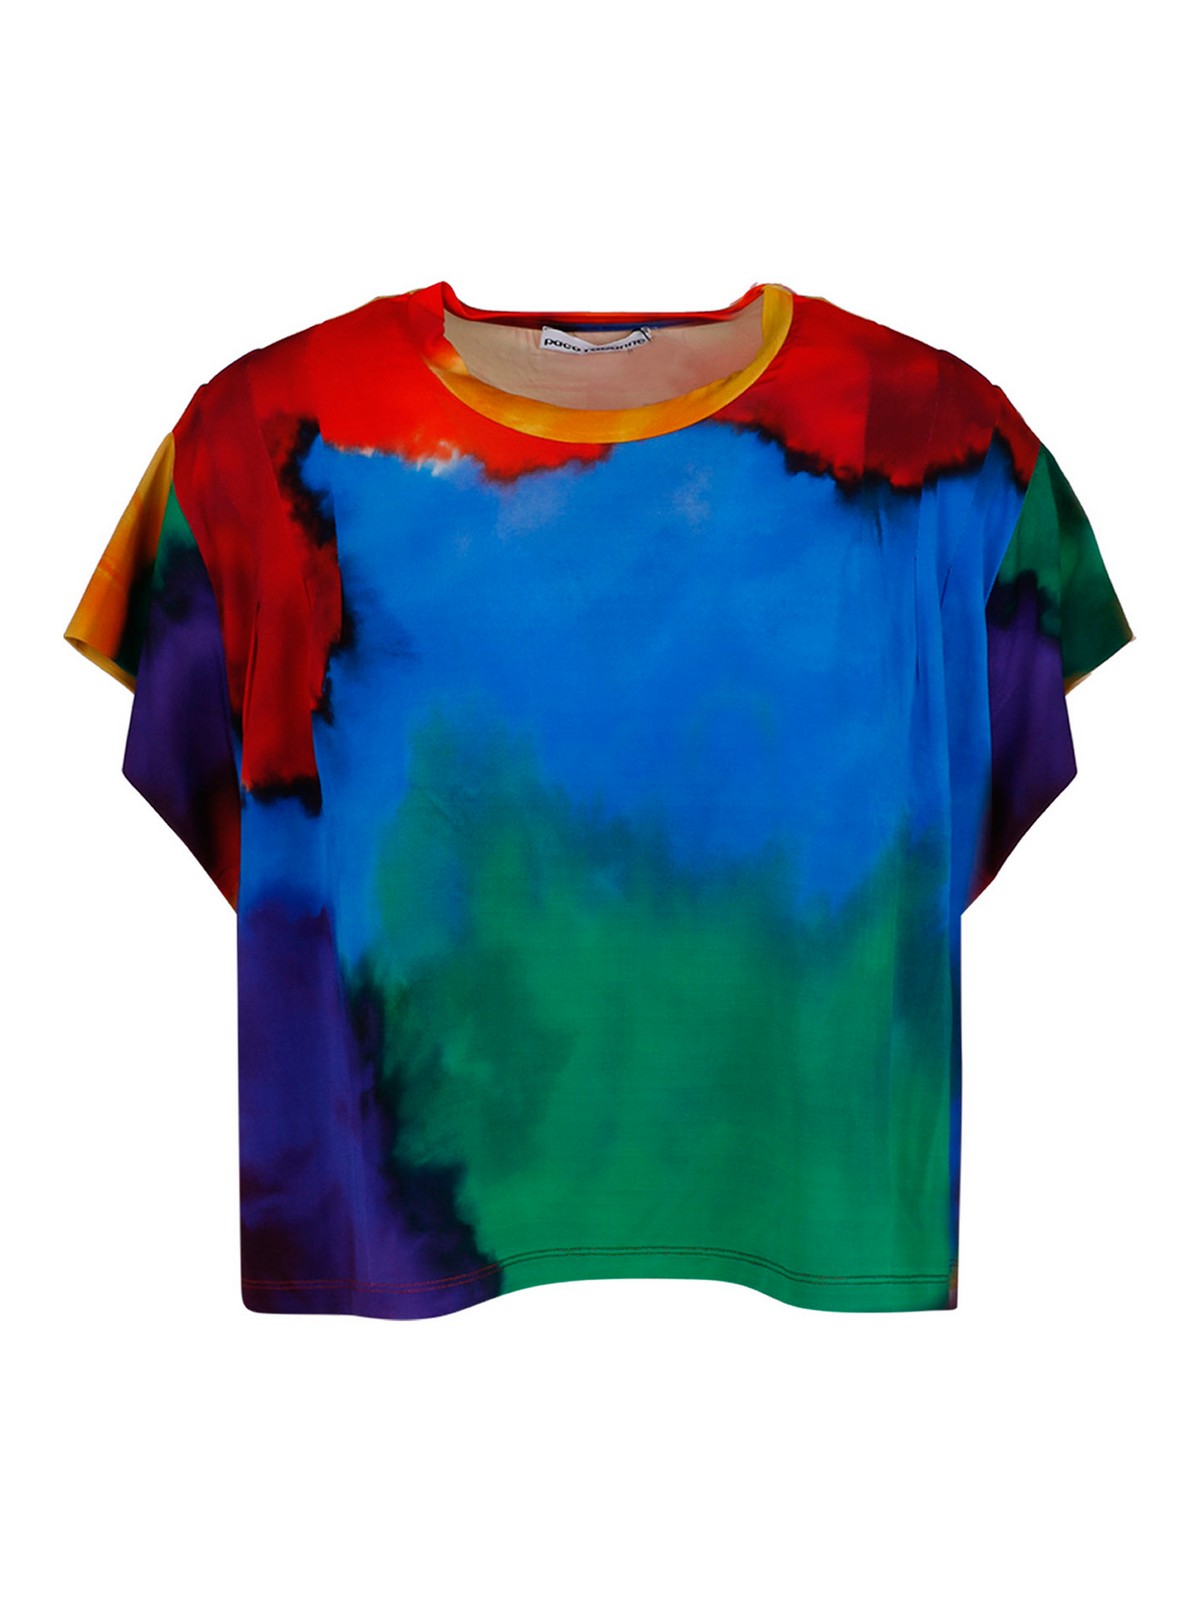 Paco Rabanne Tie Dye Patterned Crew Neck T-shirt In Multicolour